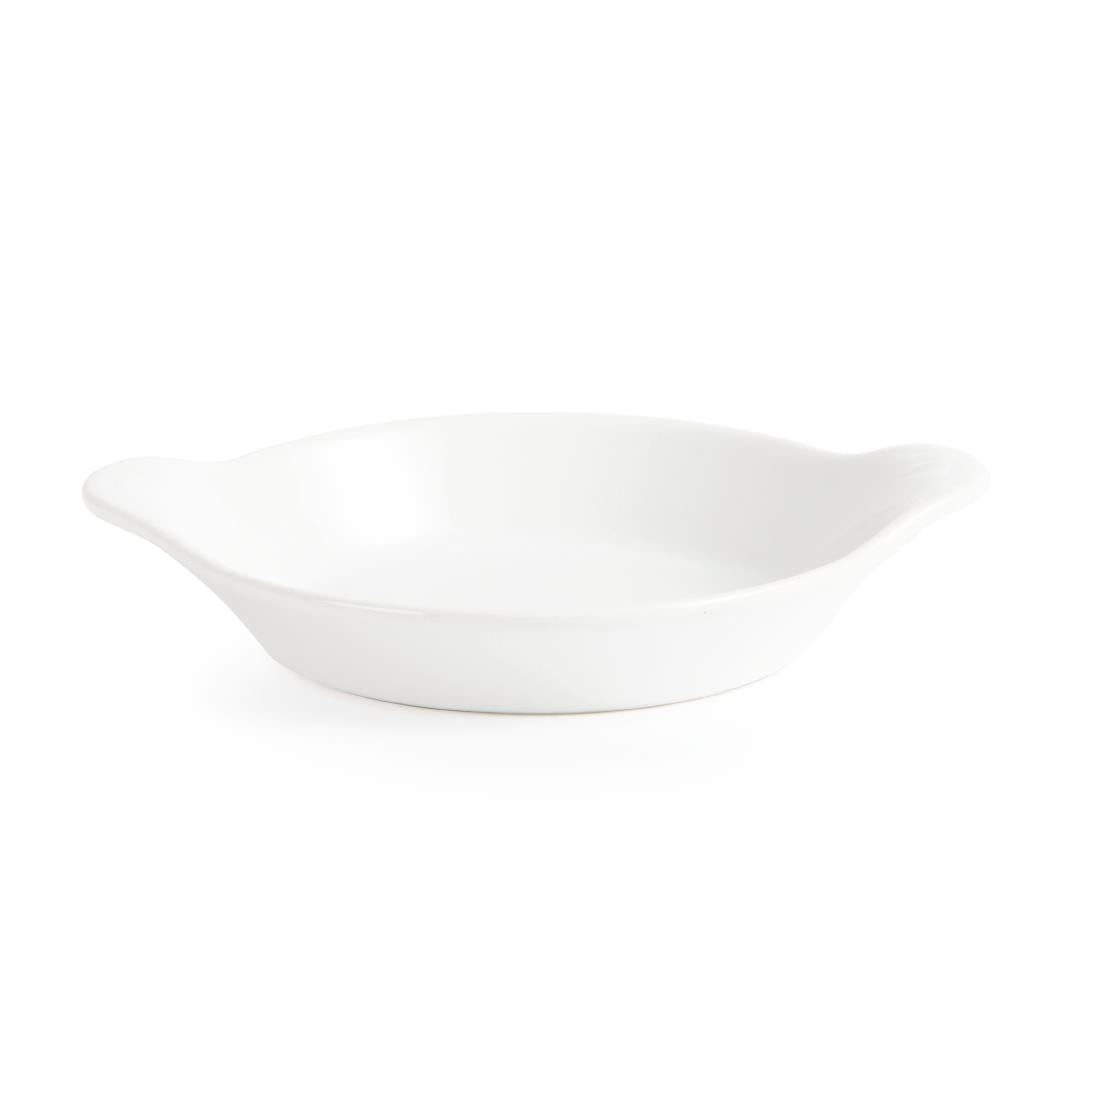 W439 Olympia Whiteware Round Eared Dishes 170 x 140mm (Pack of 6)